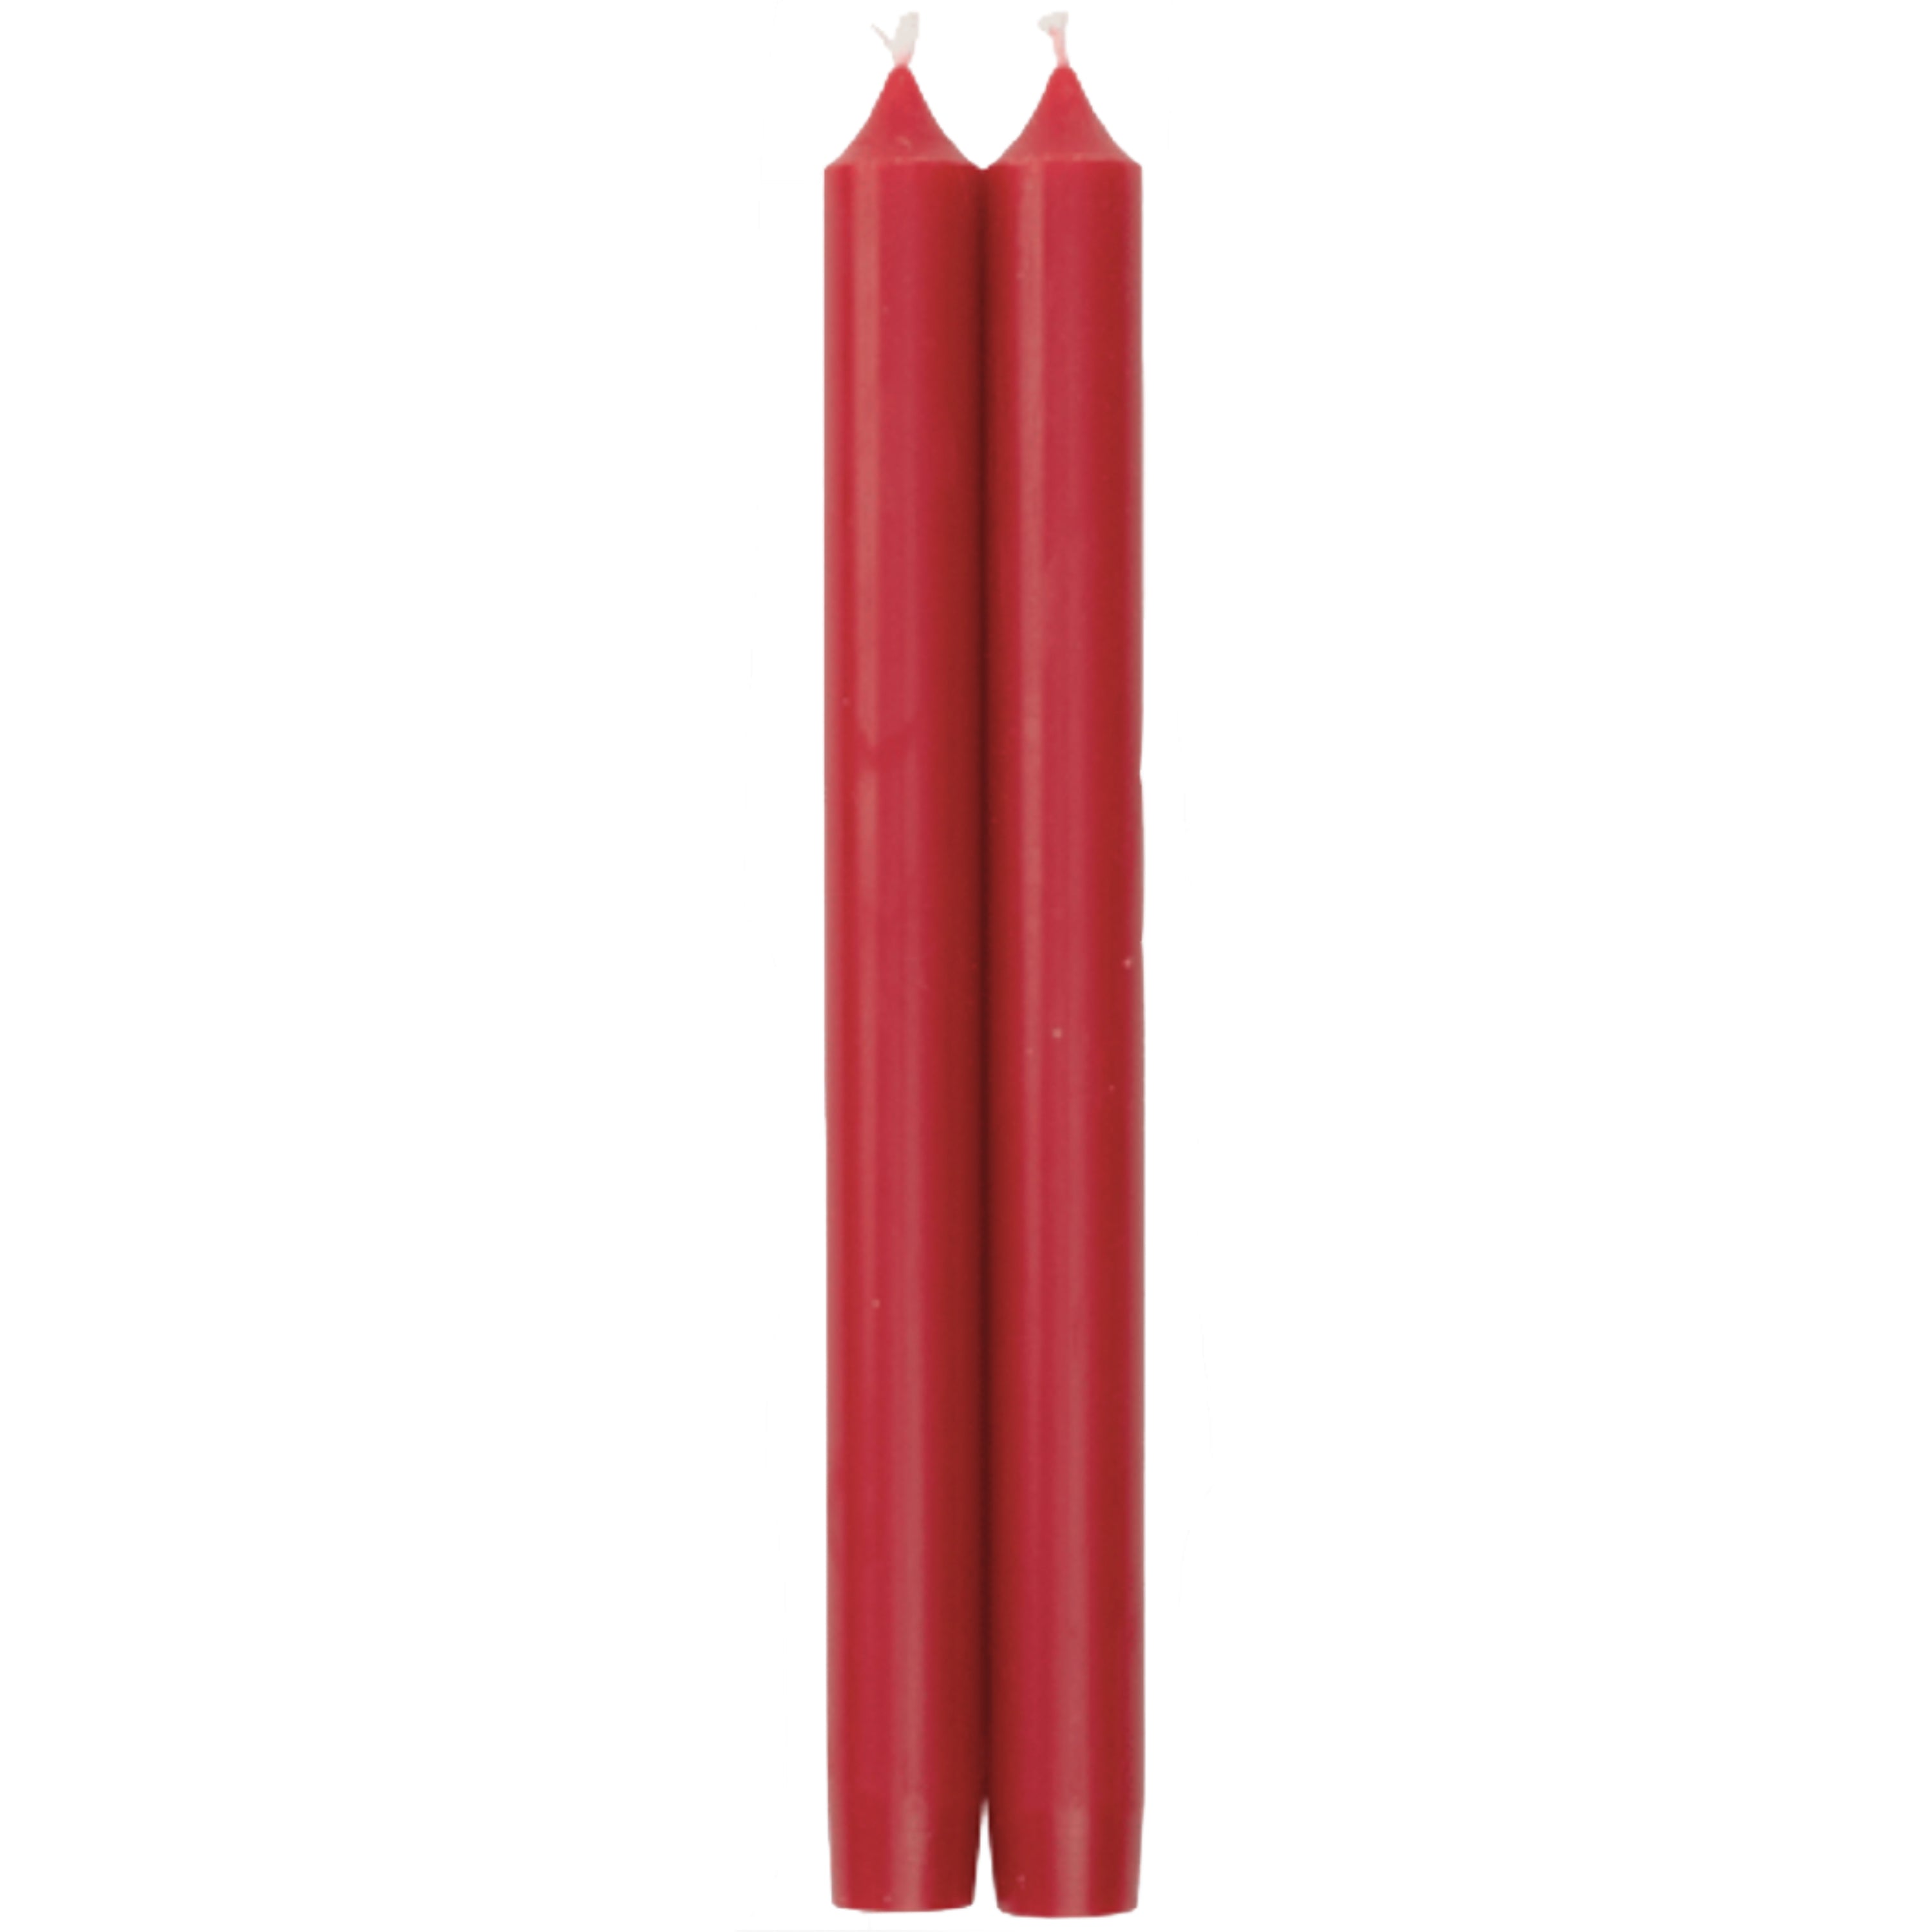 Caspari Tapered Candles in Red – 12inch – 2pk